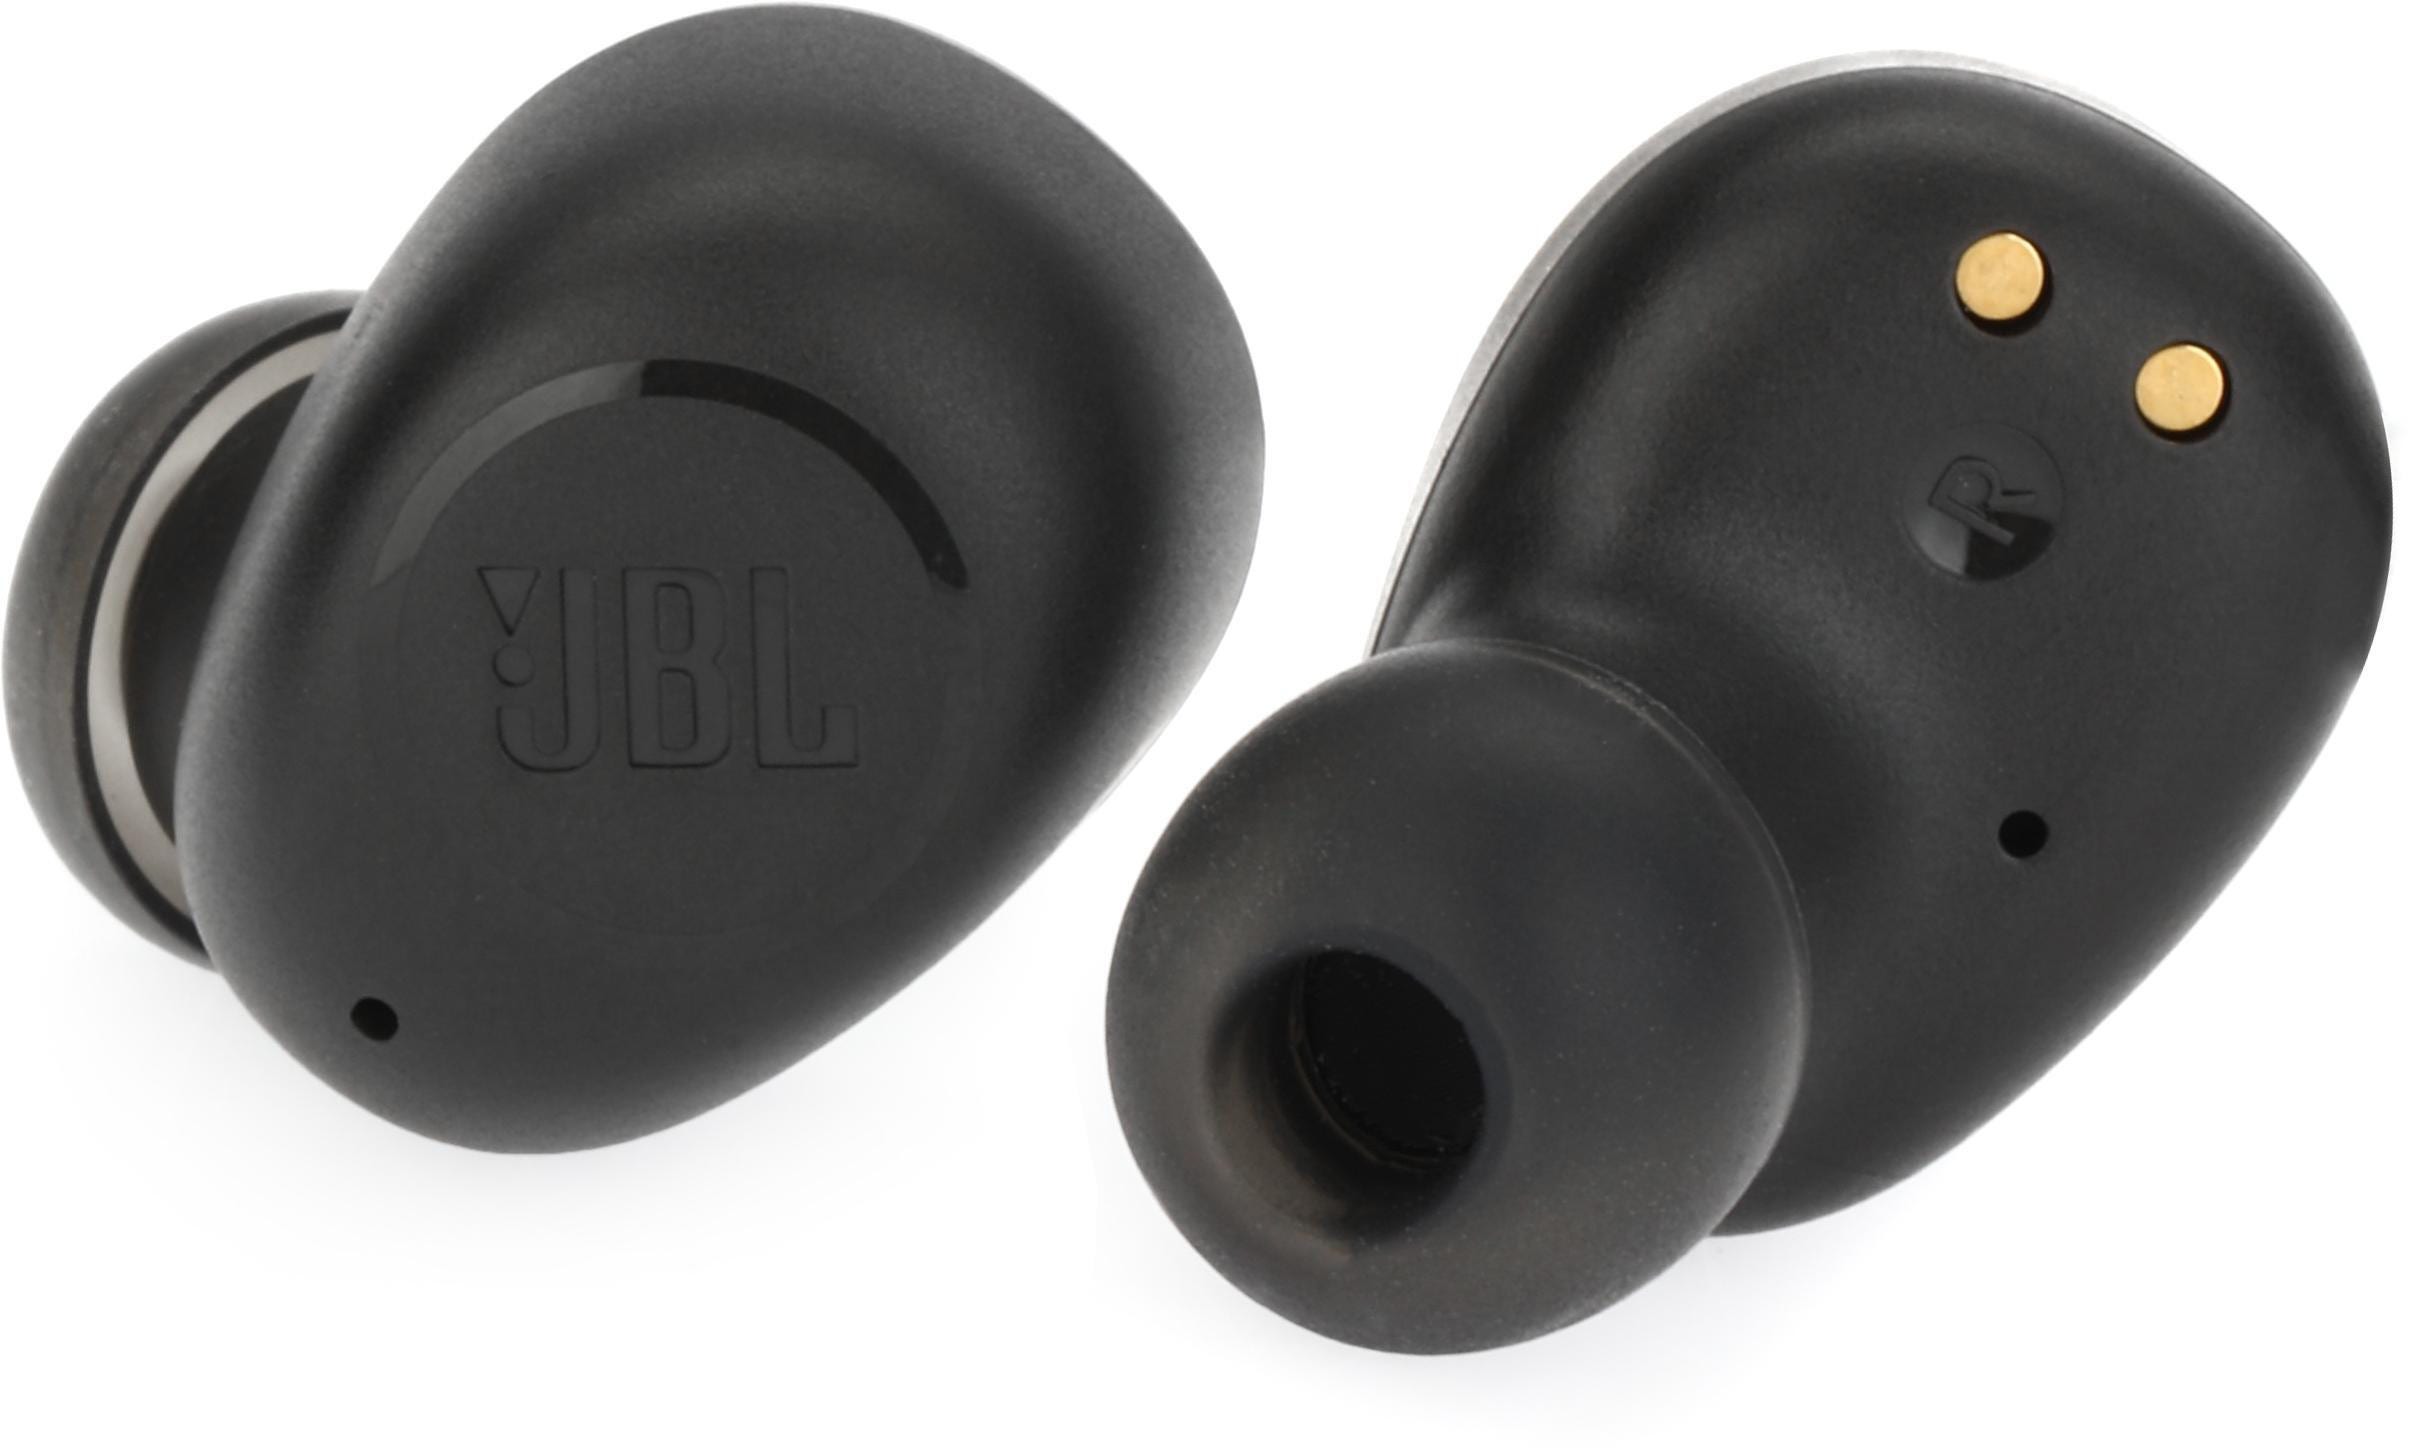 JBL TUNE and VIBE True Wireless Headphones Designed for the Perfect Fit